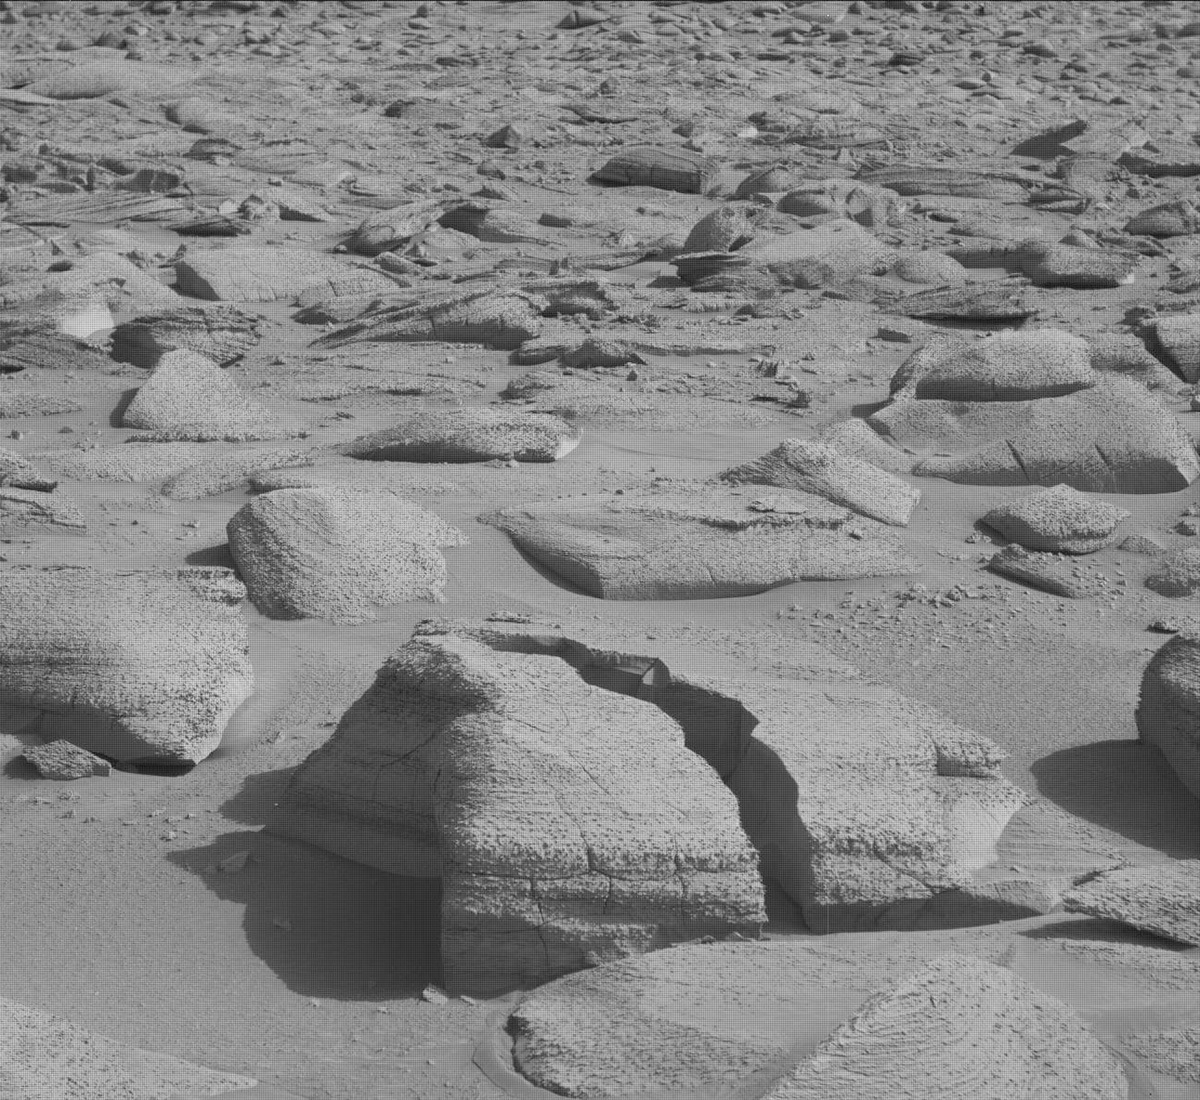 This image showing lumpy rock formations on the Mars surface was taken by Mast Camera (Mastcam) onboard NASA's Mars rover Curiosity on Sol 3846. 